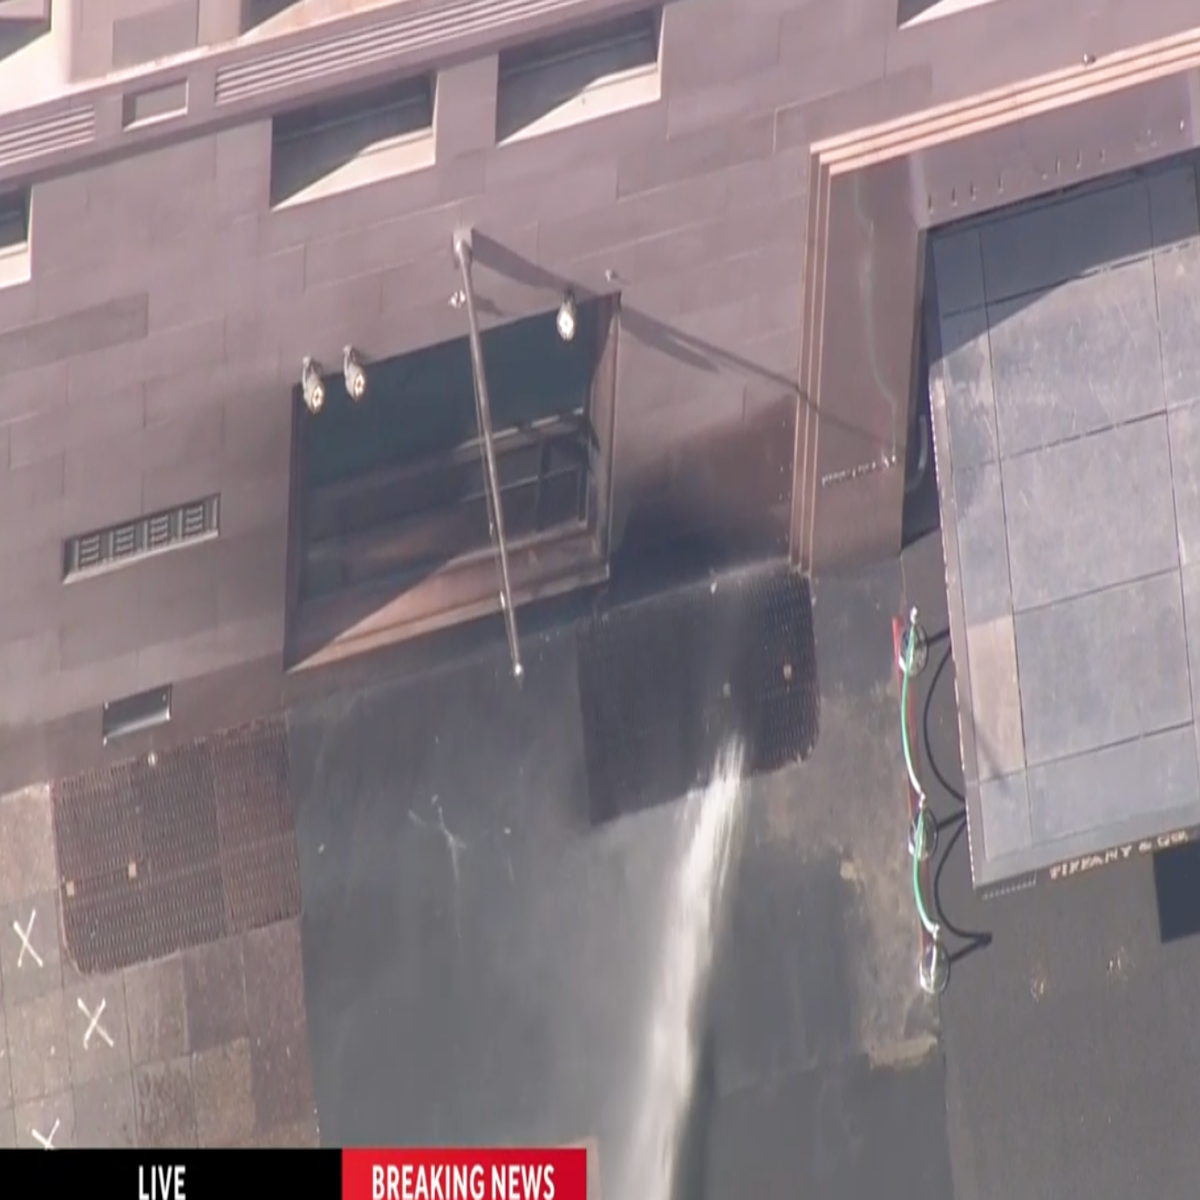 Tiffany and Co.: Fire breaks out at flagship store in New York